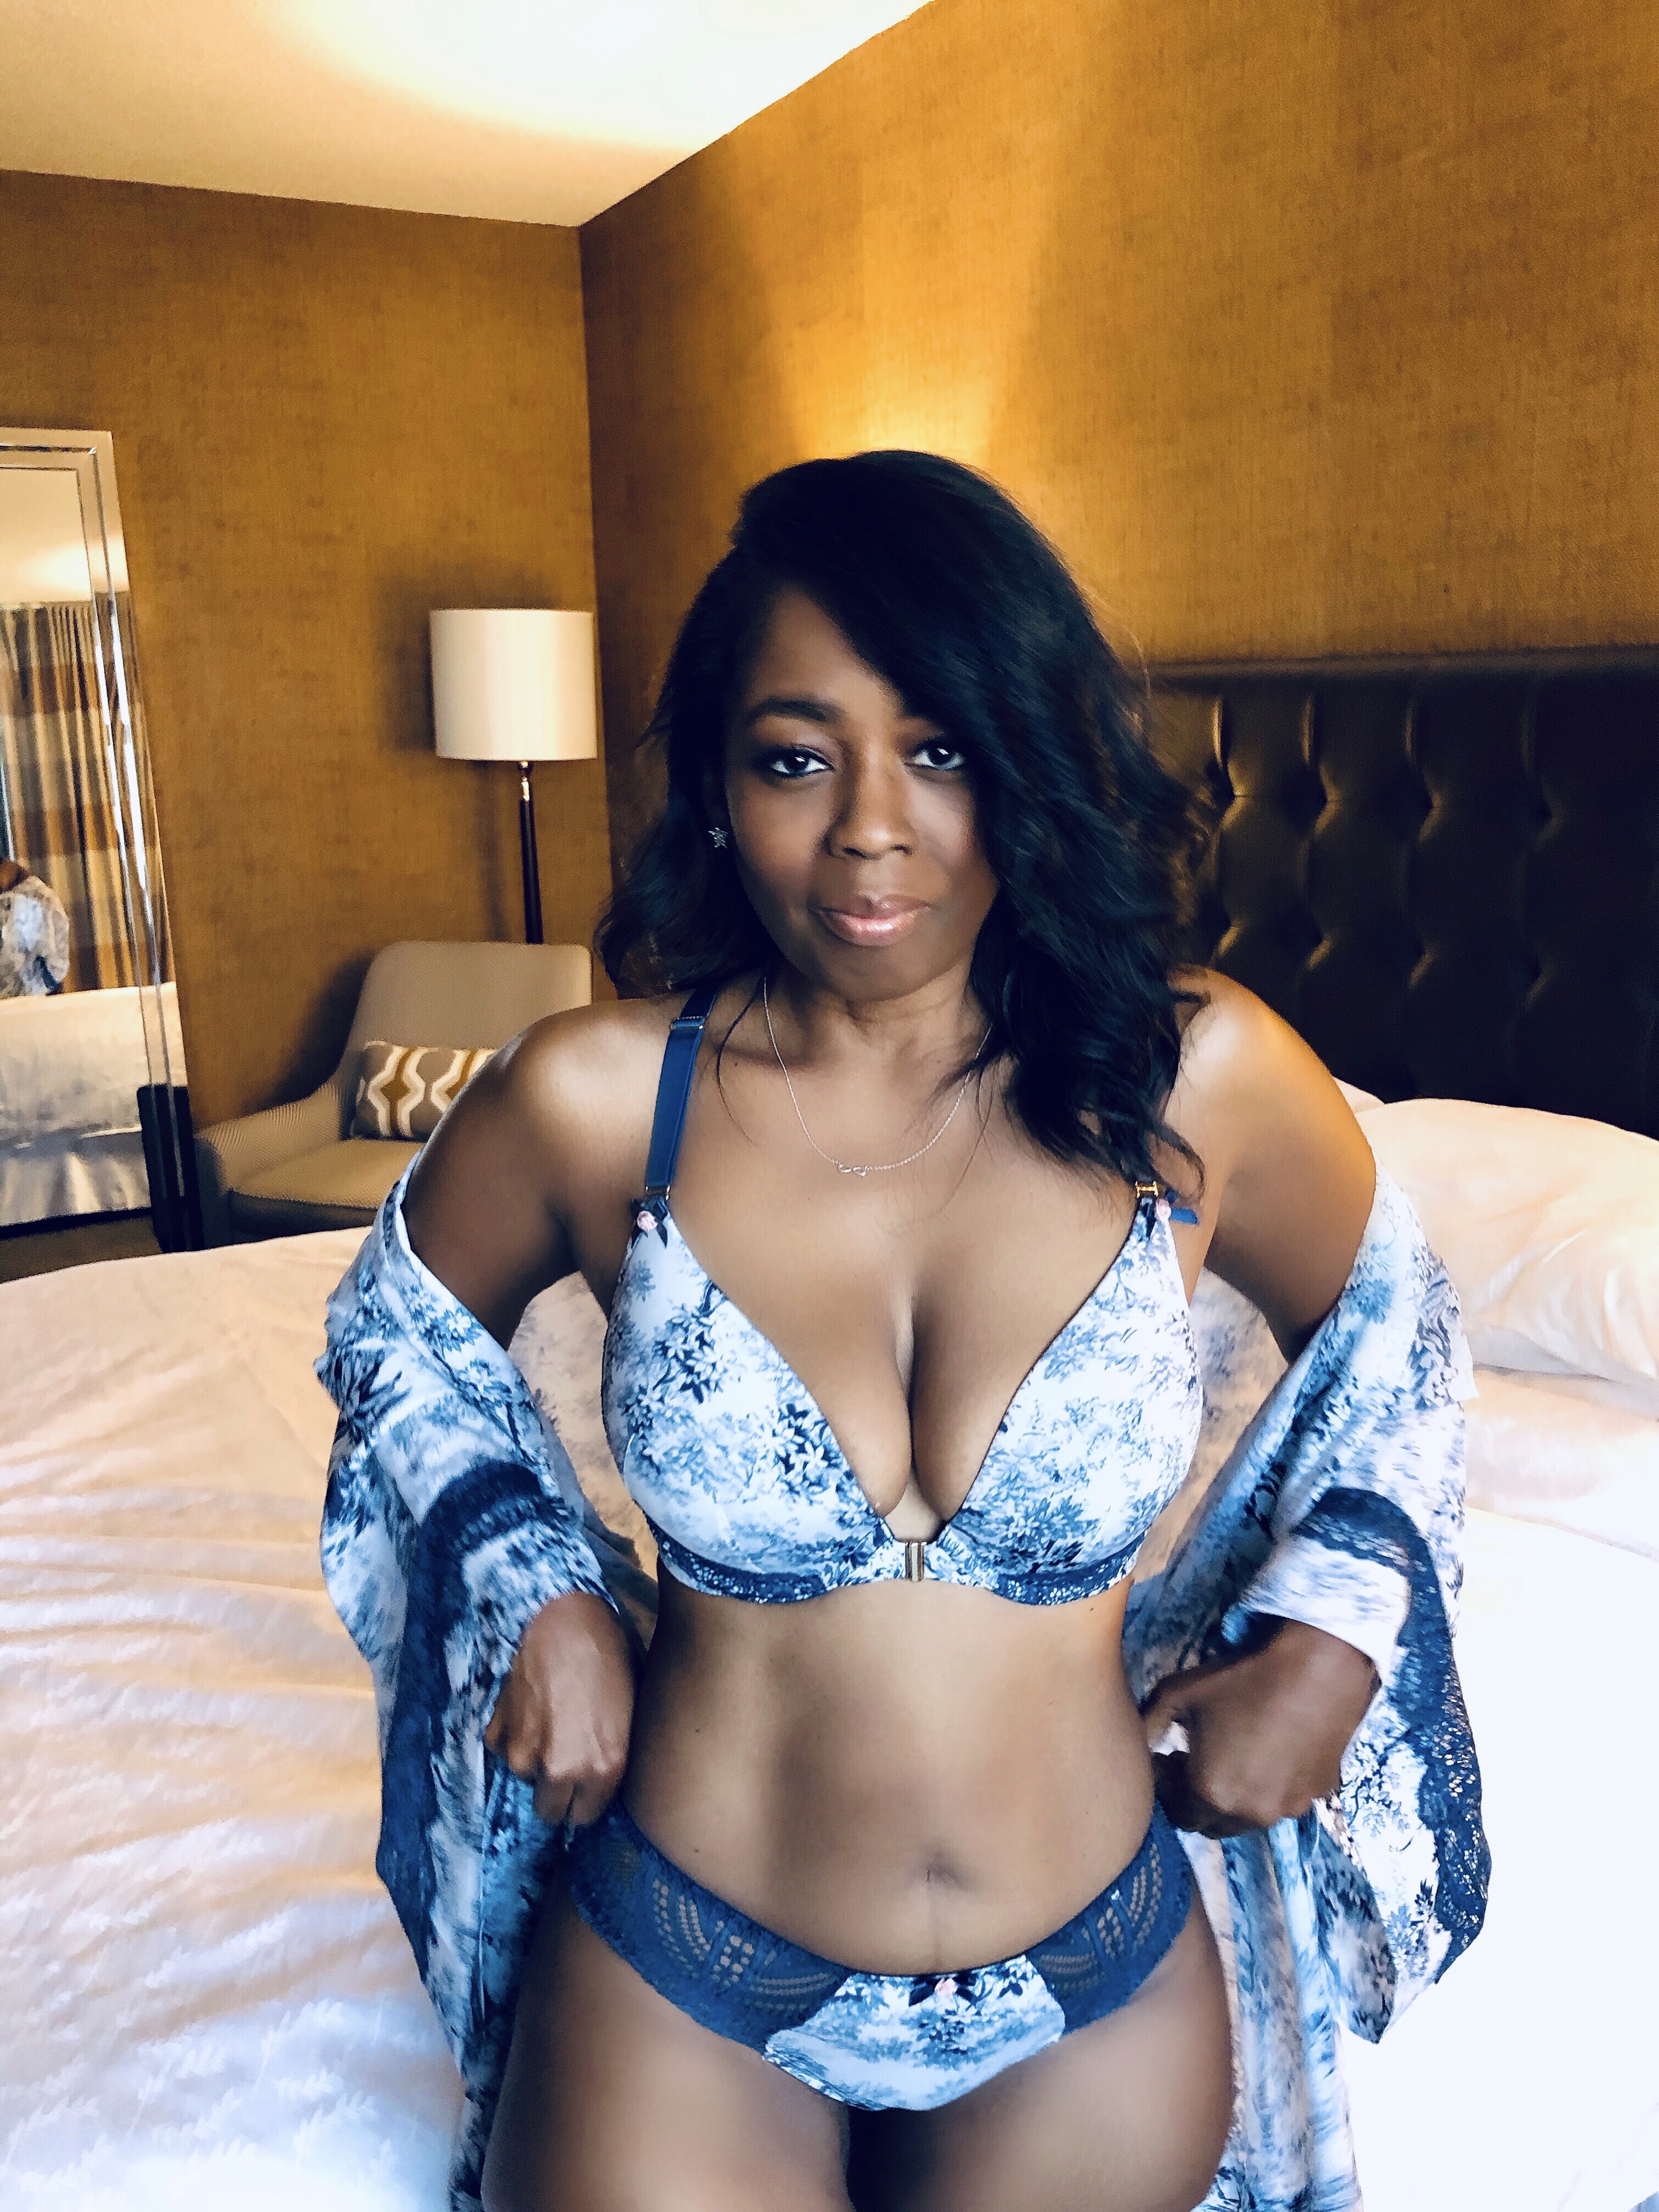 My Style: Cacique Intimates Floral Robe, Bra & Panty - Talking With Tami